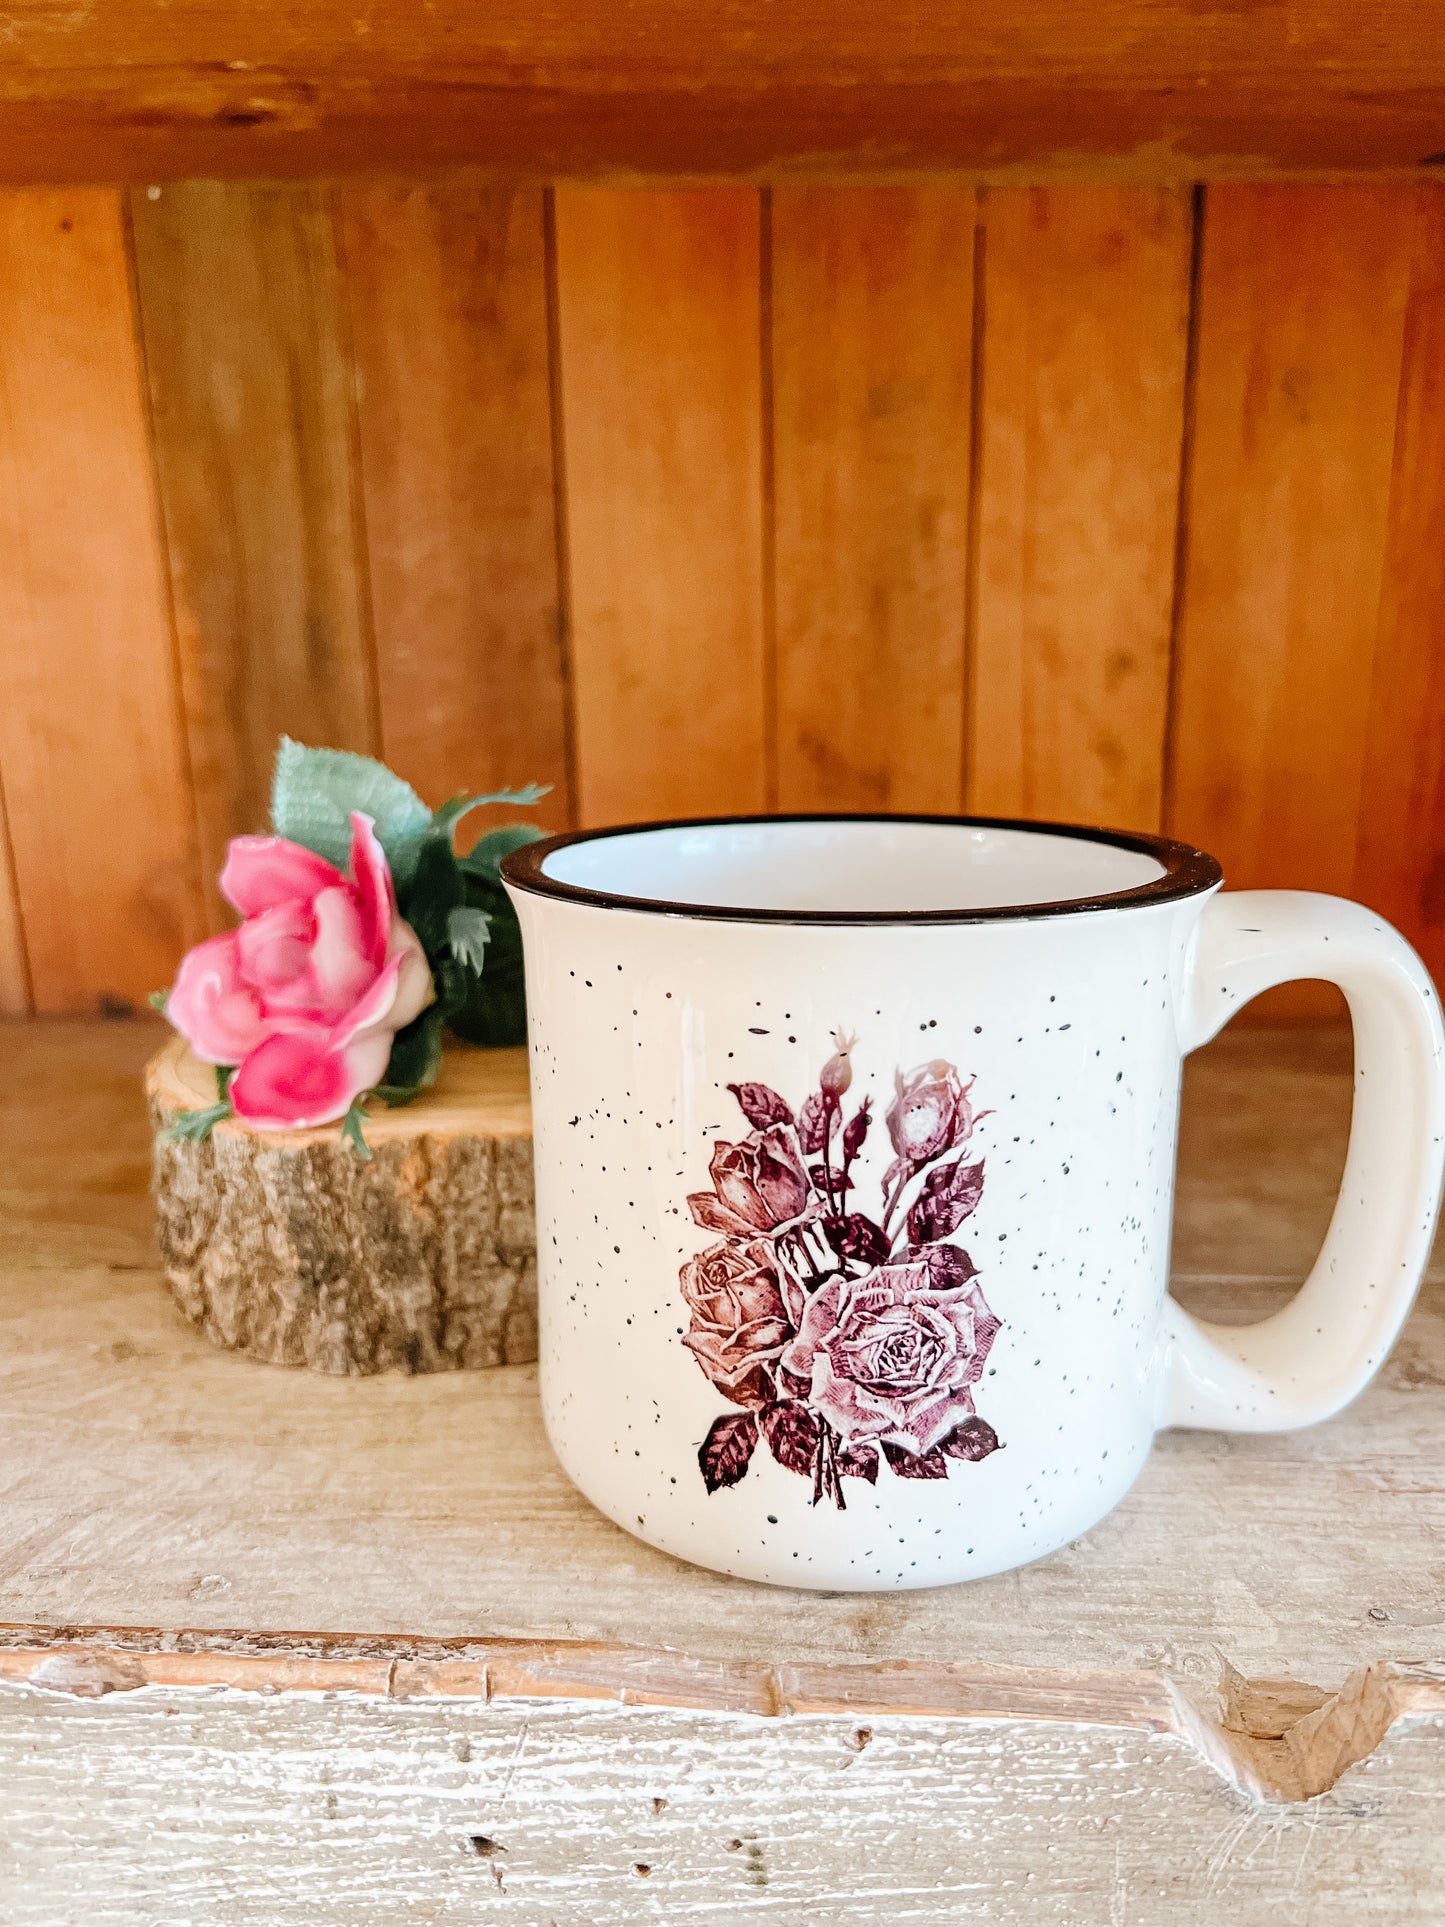 Stop & Smell the Roses mug